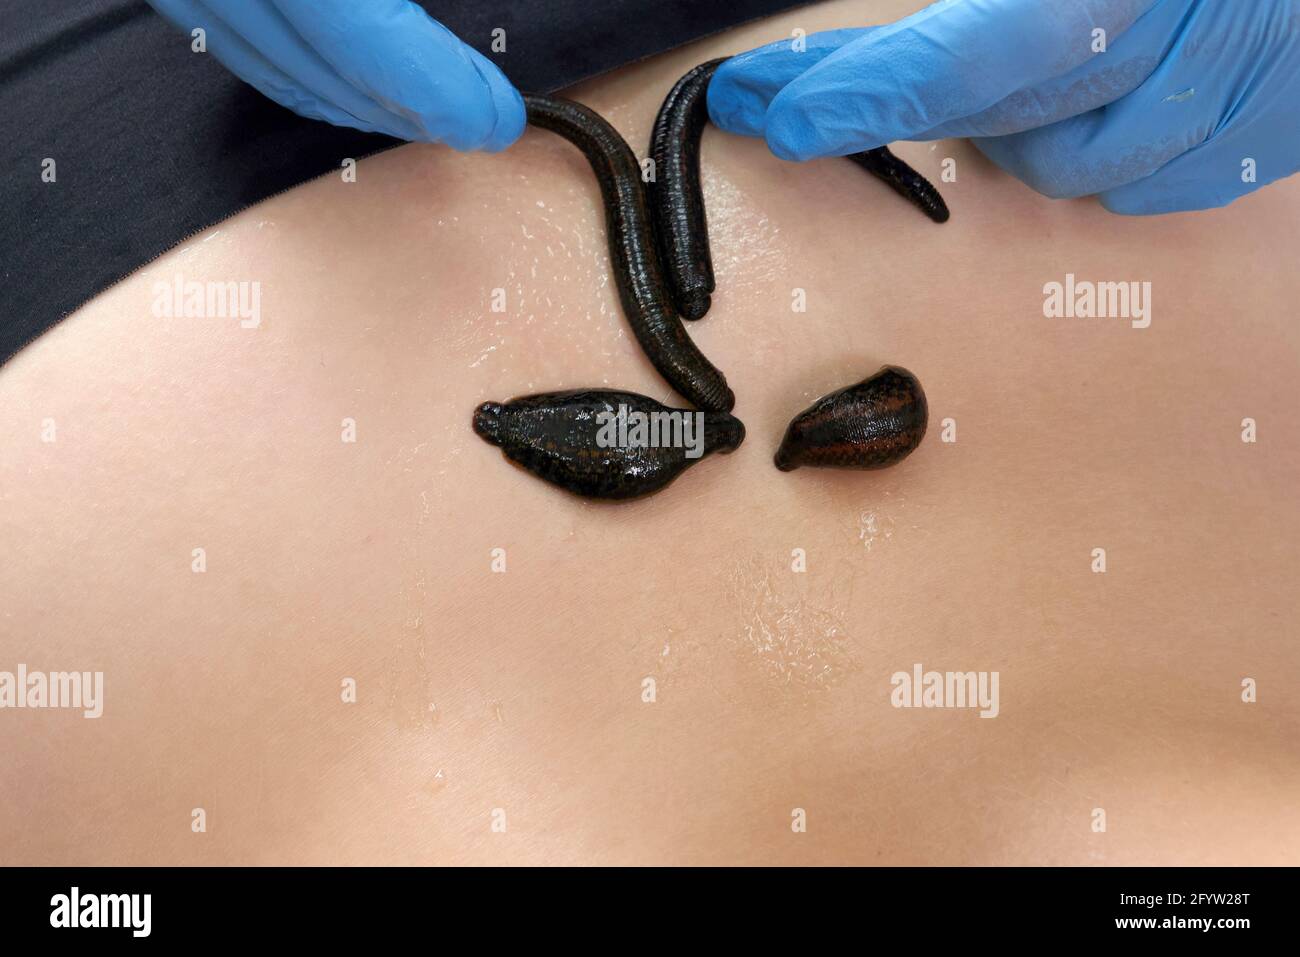 medical leeches on a human body drink blood. Treatment with leeches Stock  Photo - Alamy